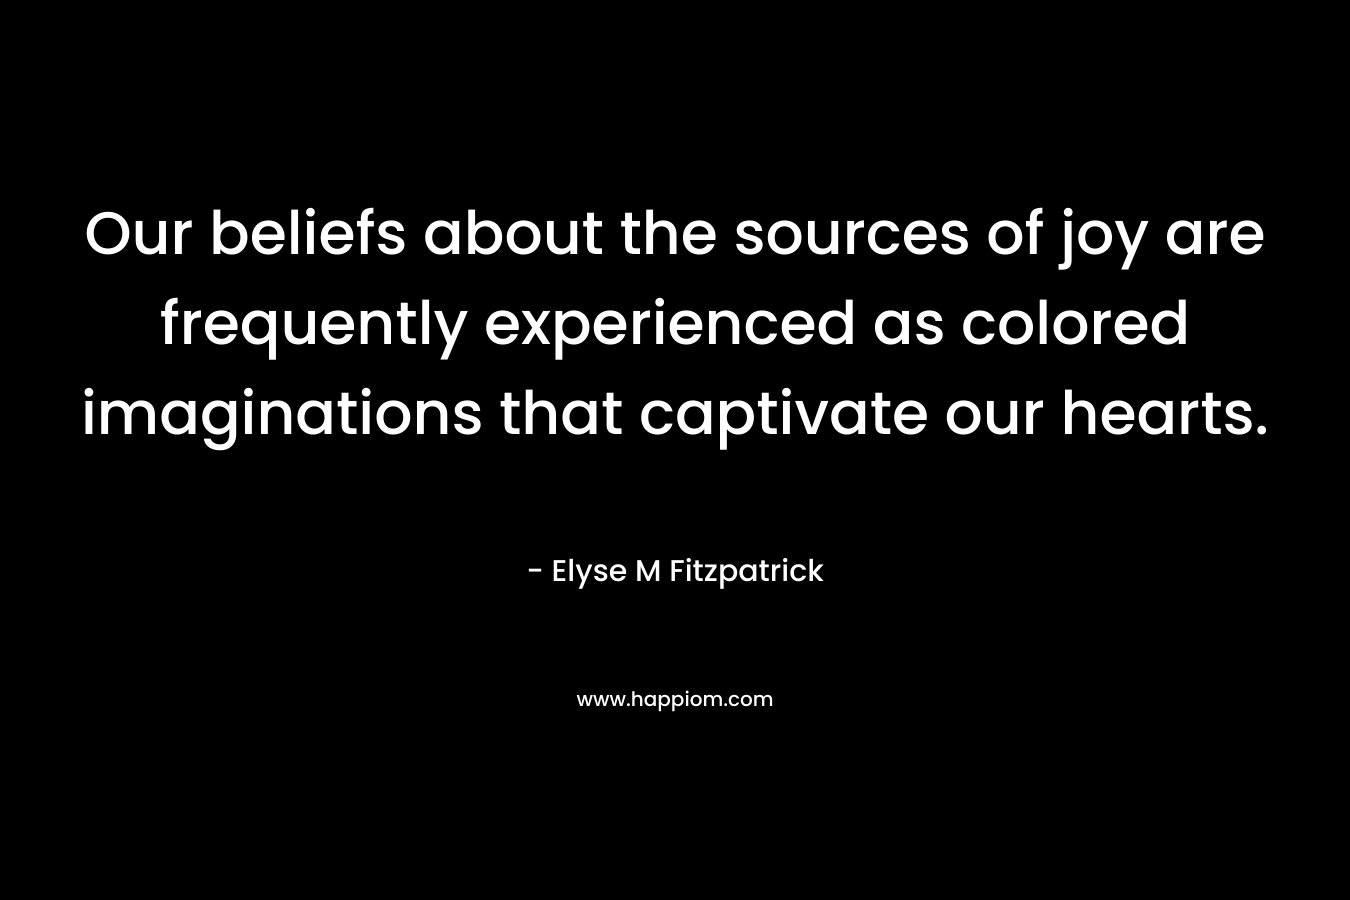 Our beliefs about the sources of joy are frequently experienced as colored imaginations that captivate our hearts. – Elyse M Fitzpatrick